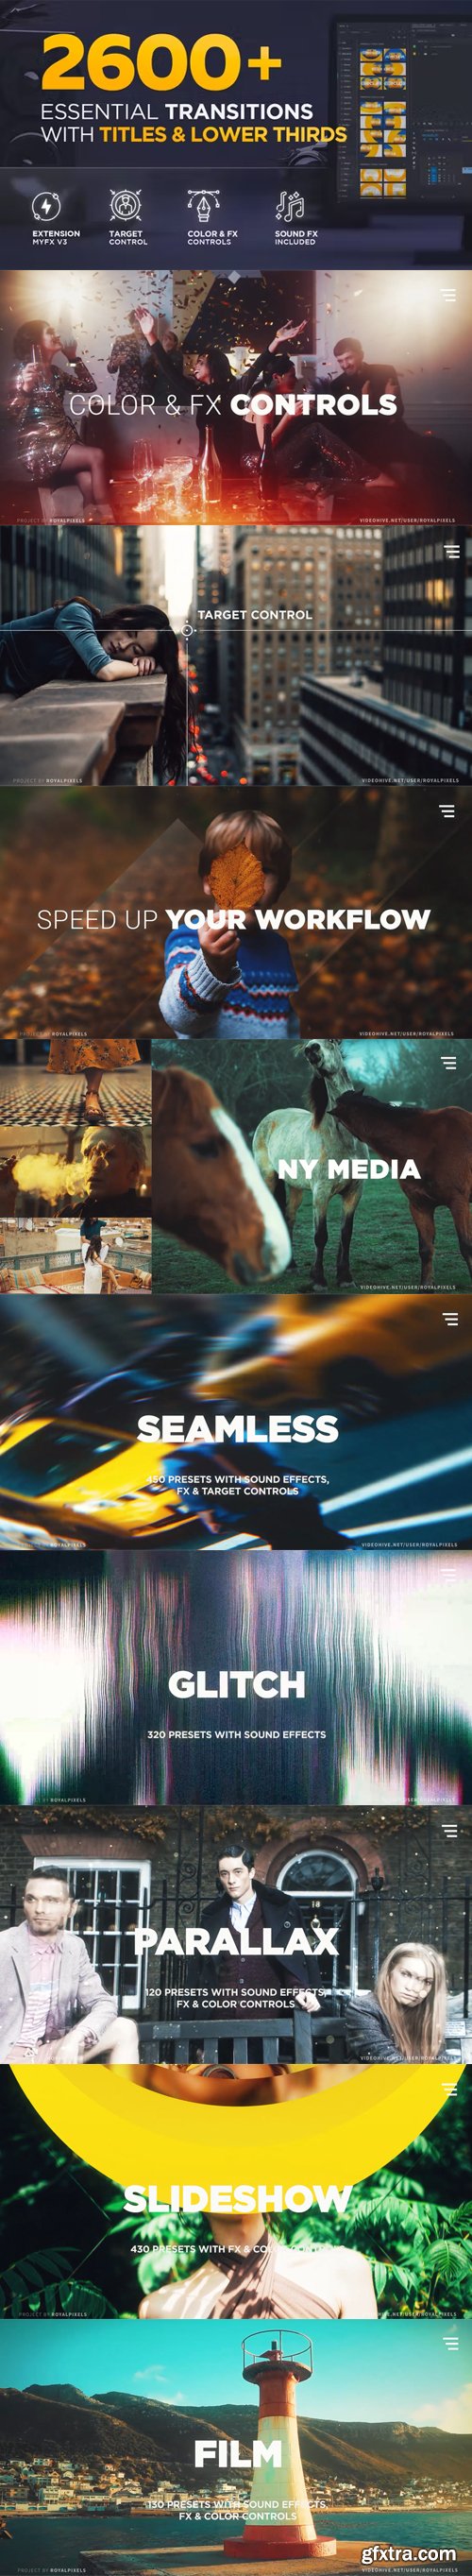 Videohive - Transitions for Premiere Pro V1.2 - 34783327